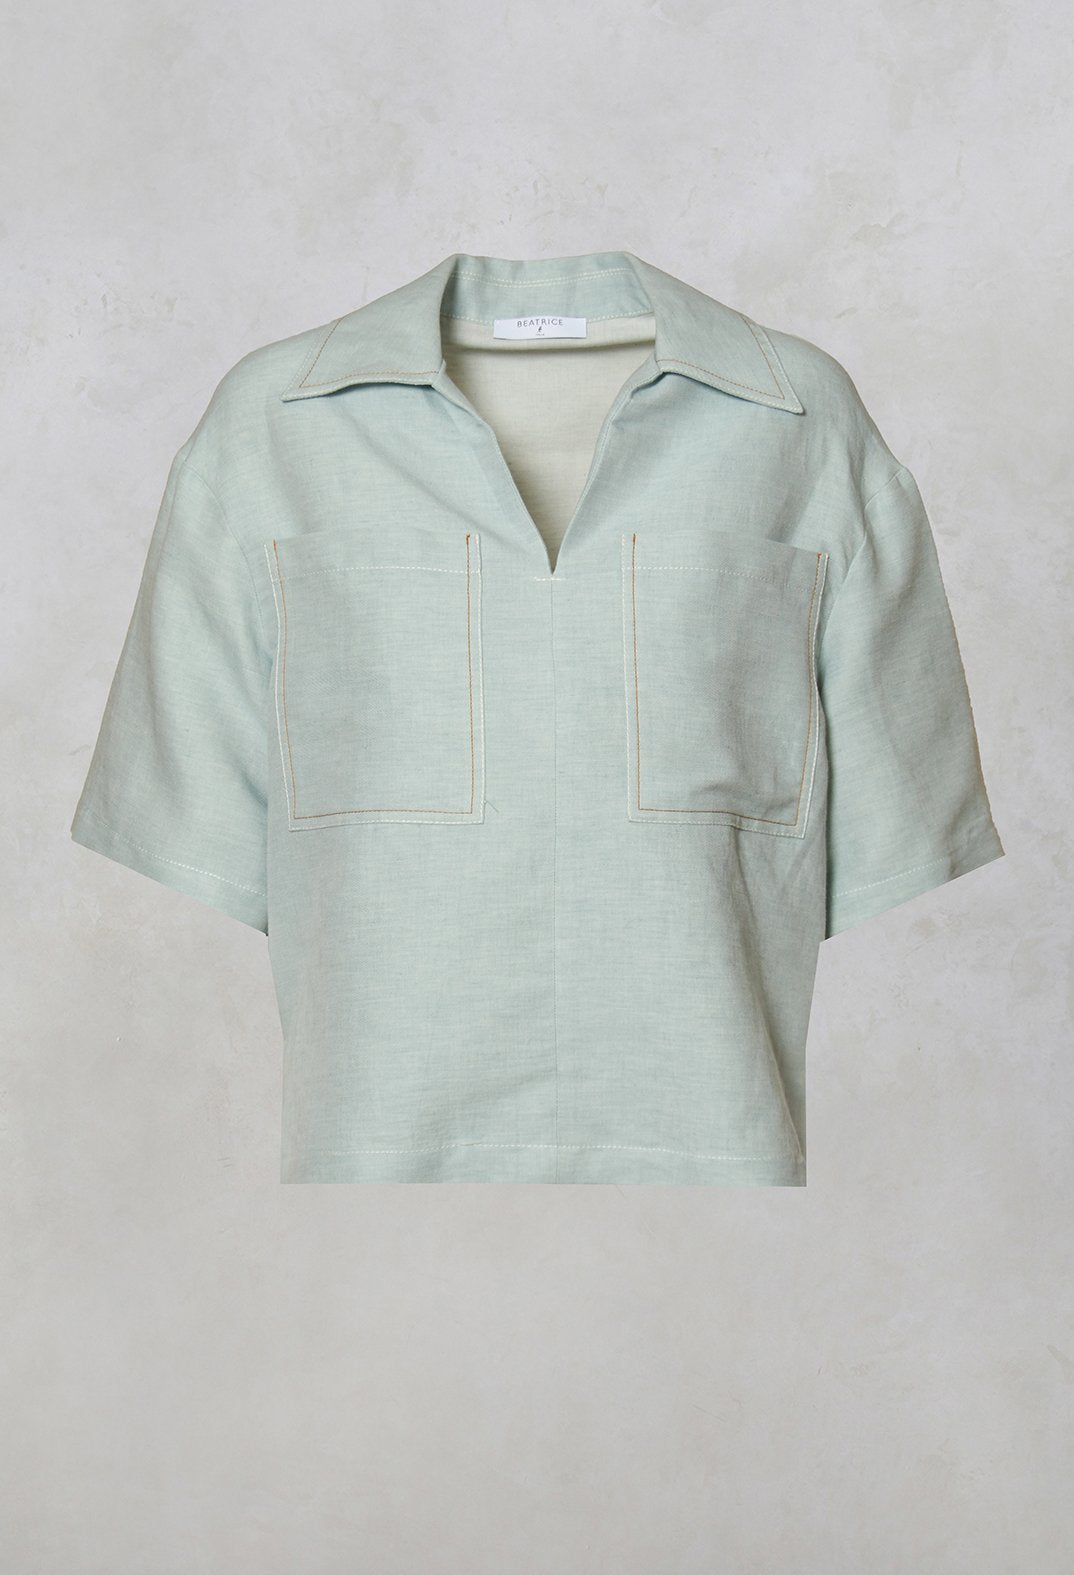 sky linen blouse with large pockets and neck collar